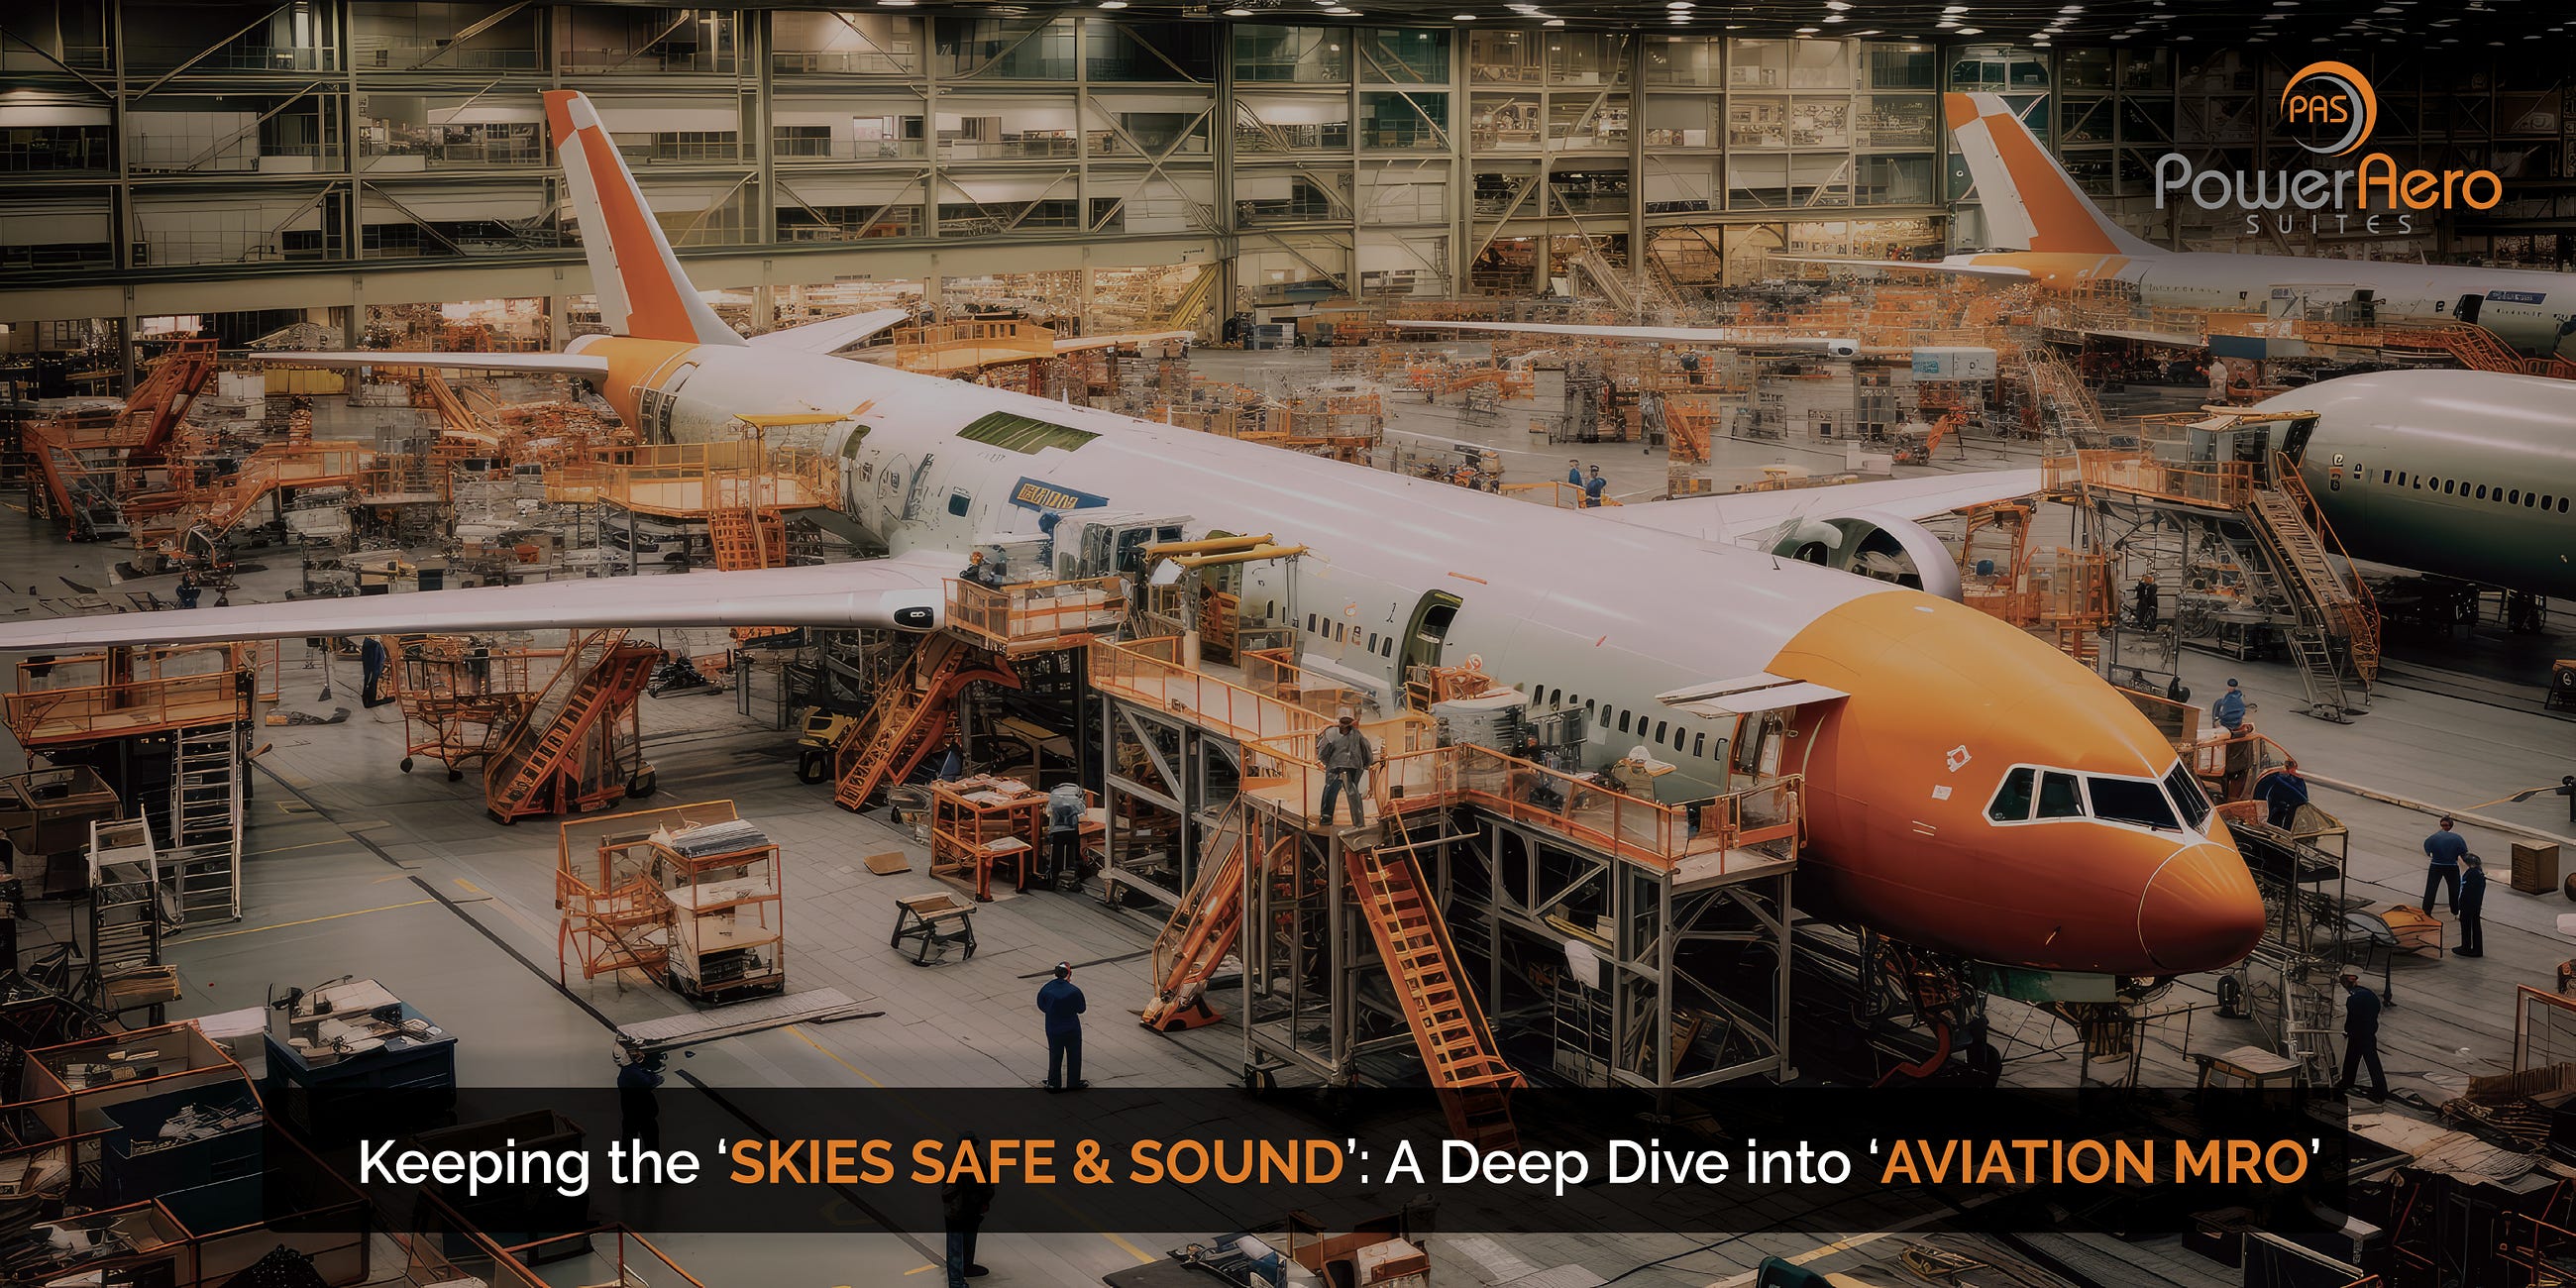 Keeping the ‘Skies Safe and Sound’: A Deep Dive into ‘Aviation MRO’